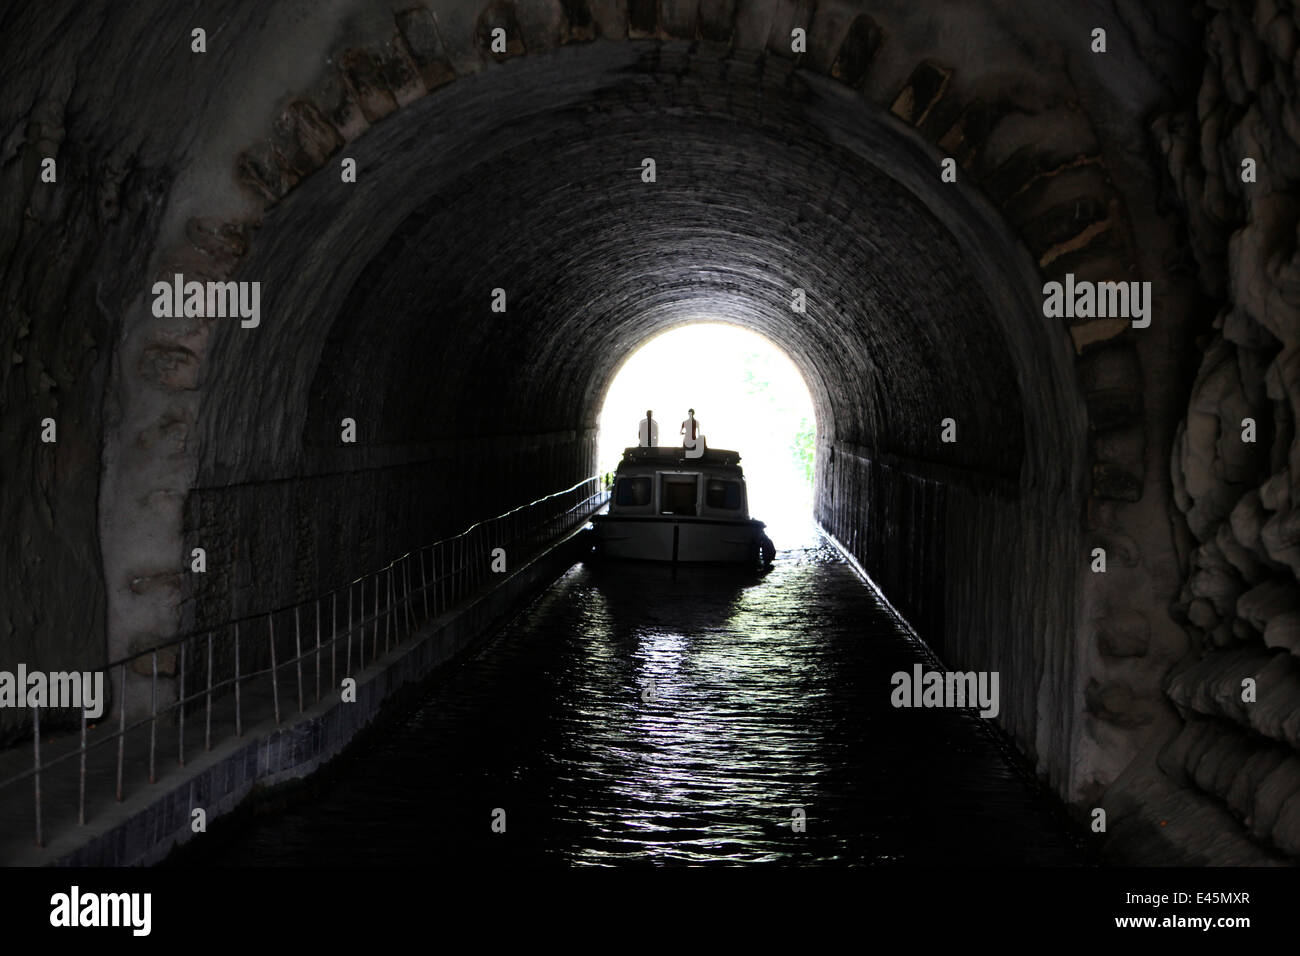 Boat passing through a tunnel on the Canal Du Midi near Capestang, Languedoc, France. July 2009. Model and property released. Stock Photo